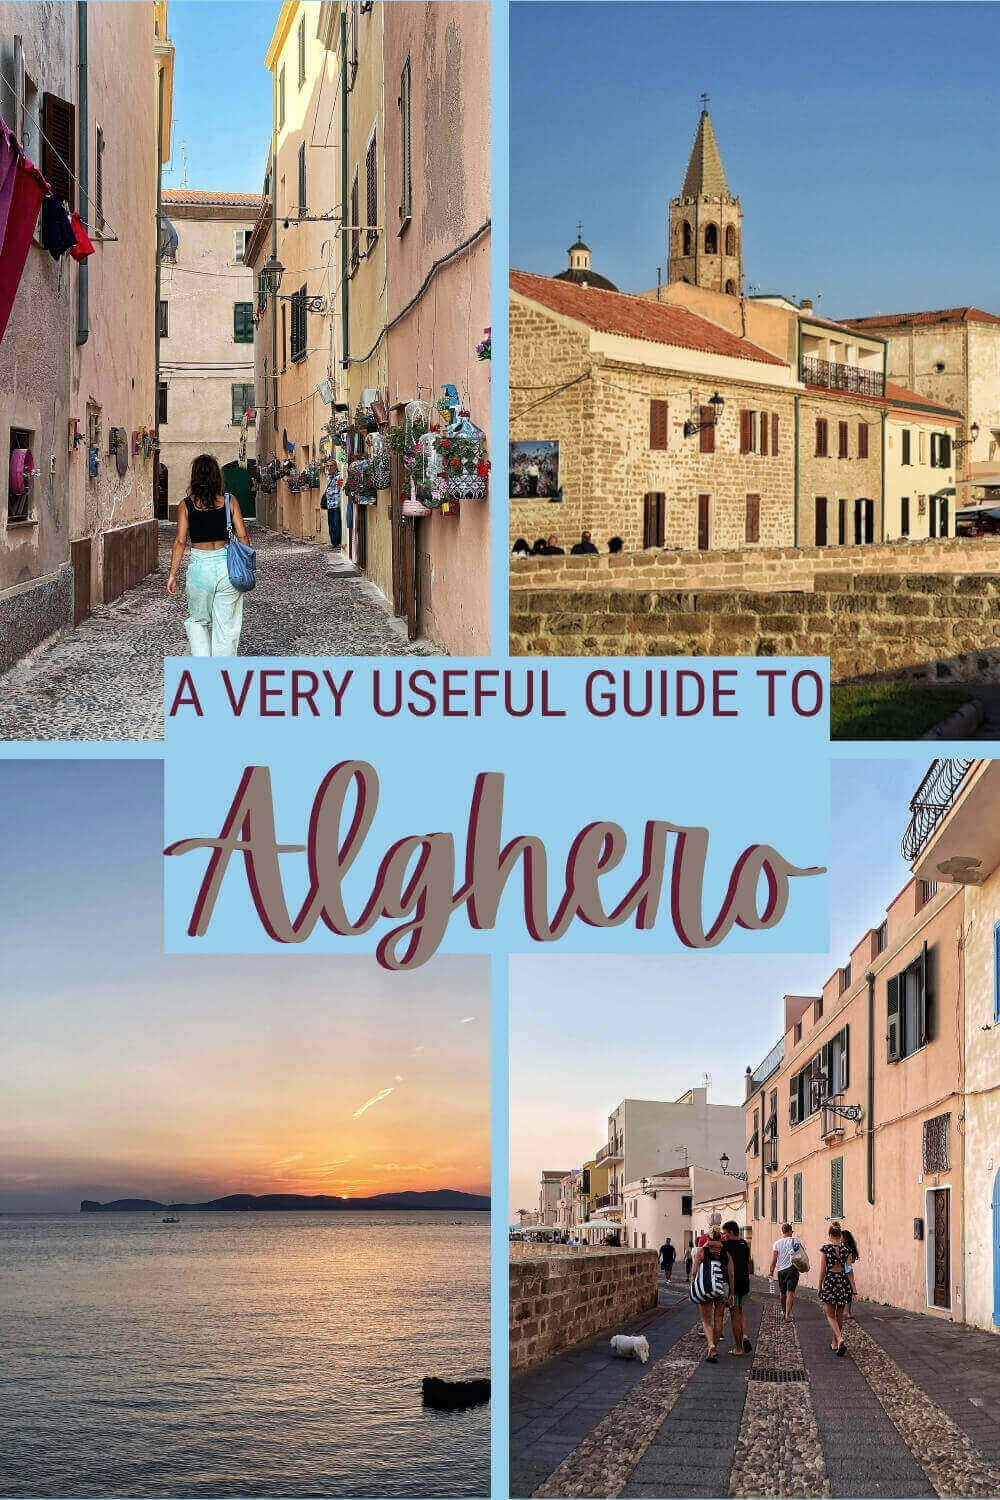 Read about the things to see and do in Alghero, Sardinia - via @c_tavani